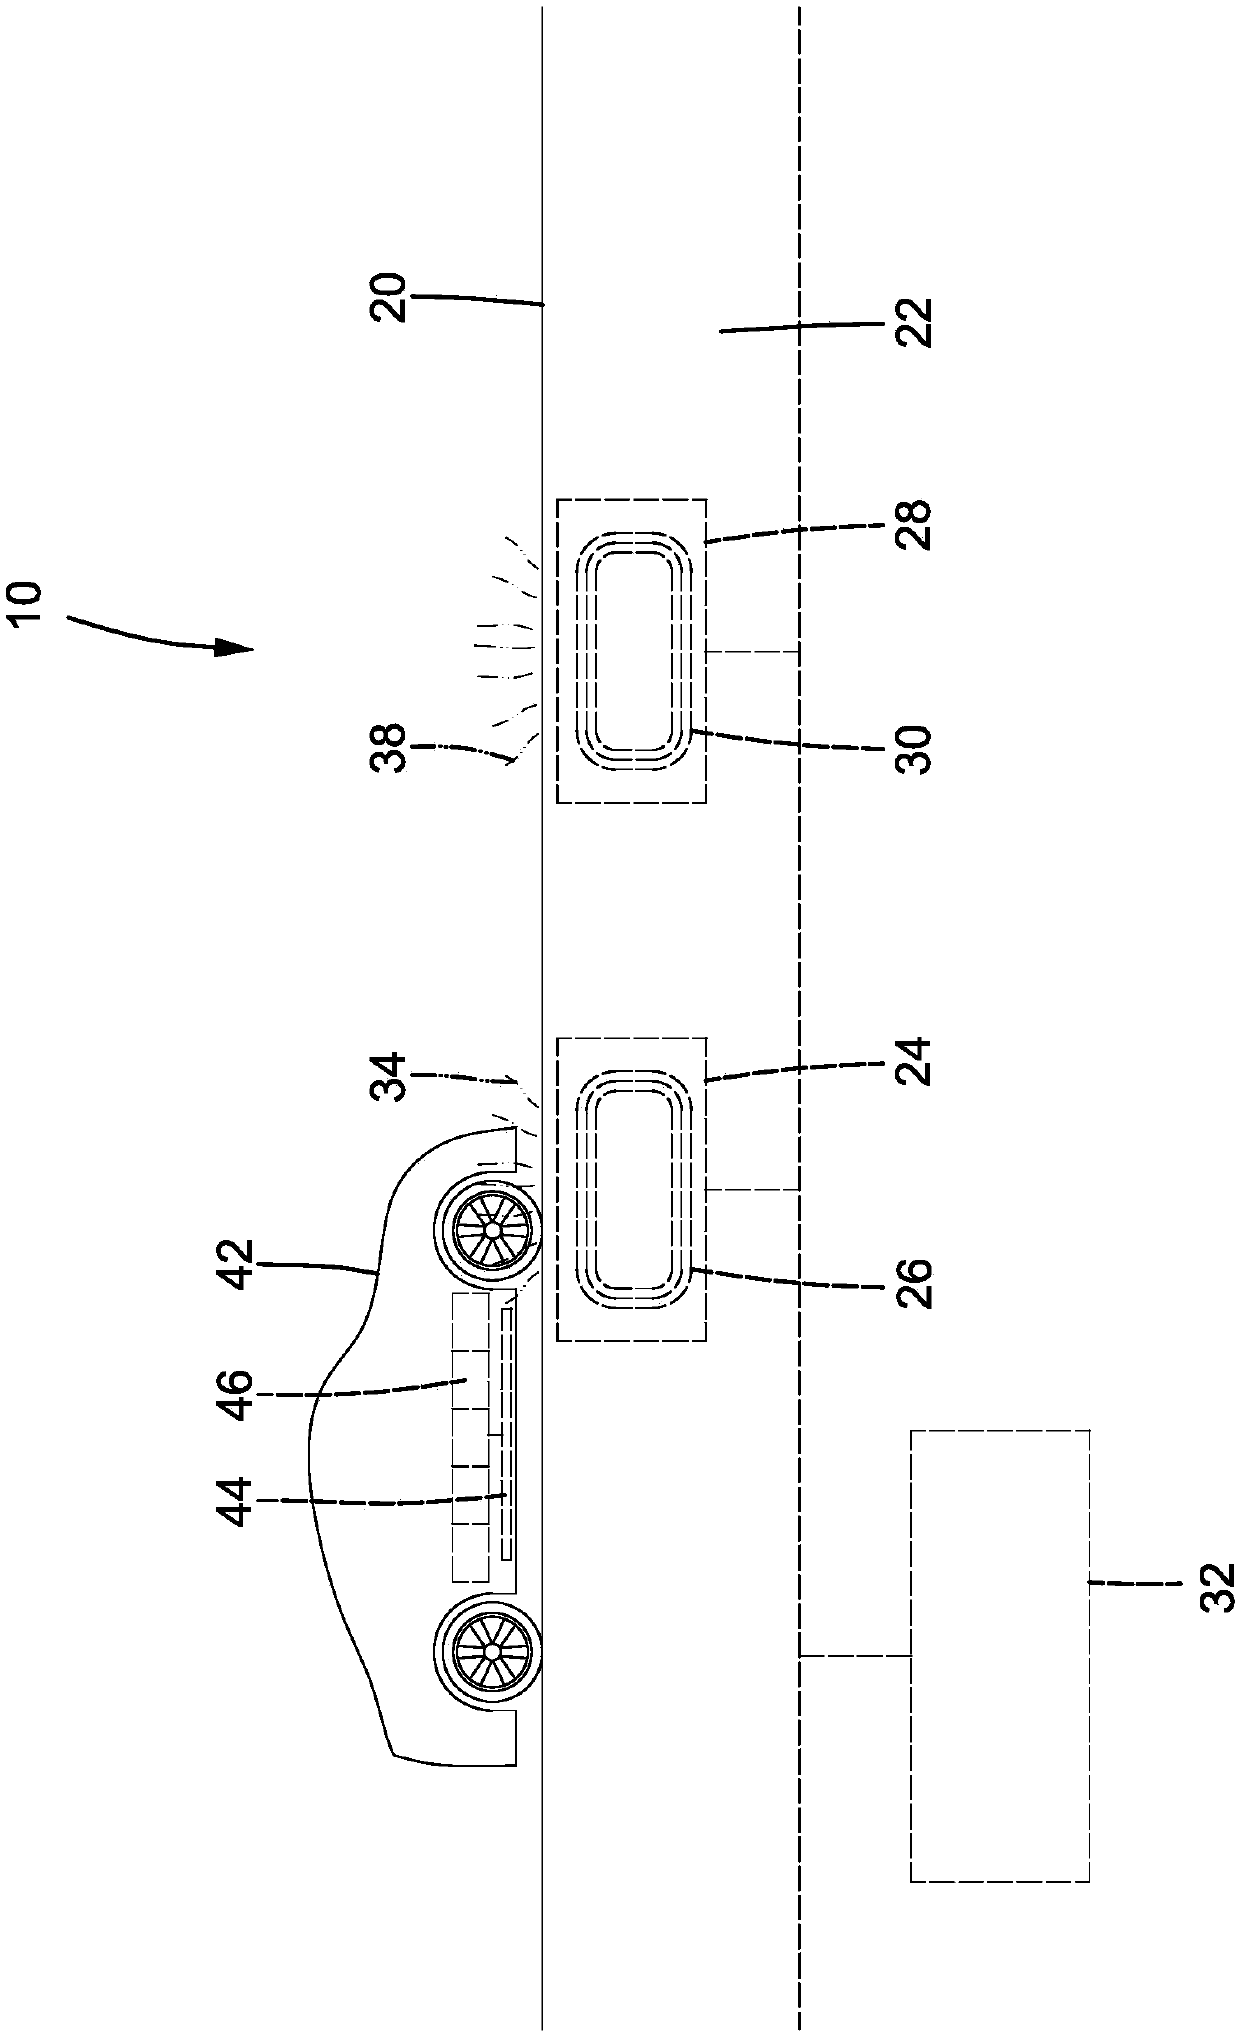 Method for dynamically and continuously wirelessly charging built-in and externally-connected vehicle and motor